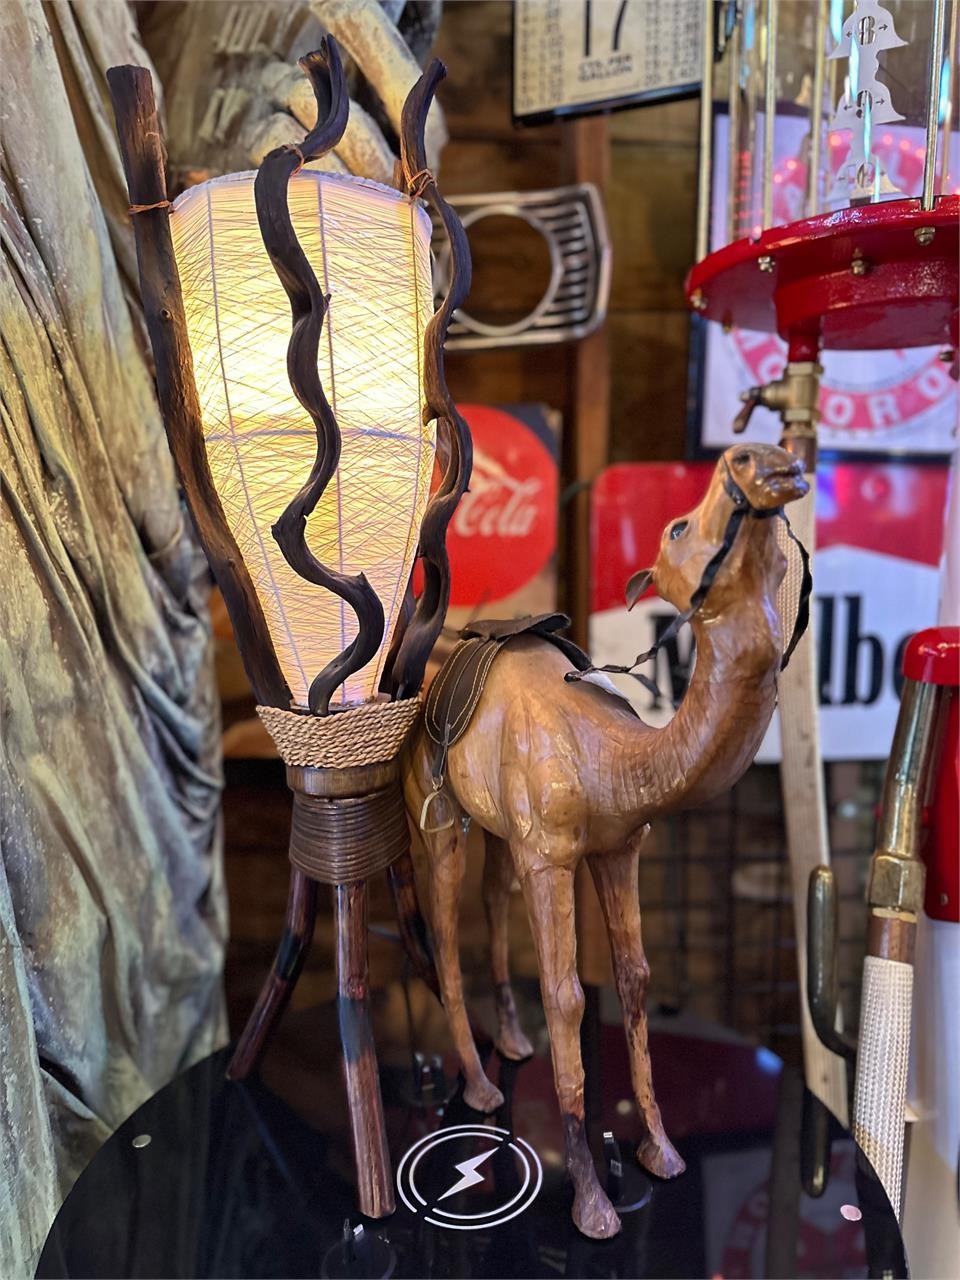 21 x 16” Camel Display and Unique Lamp